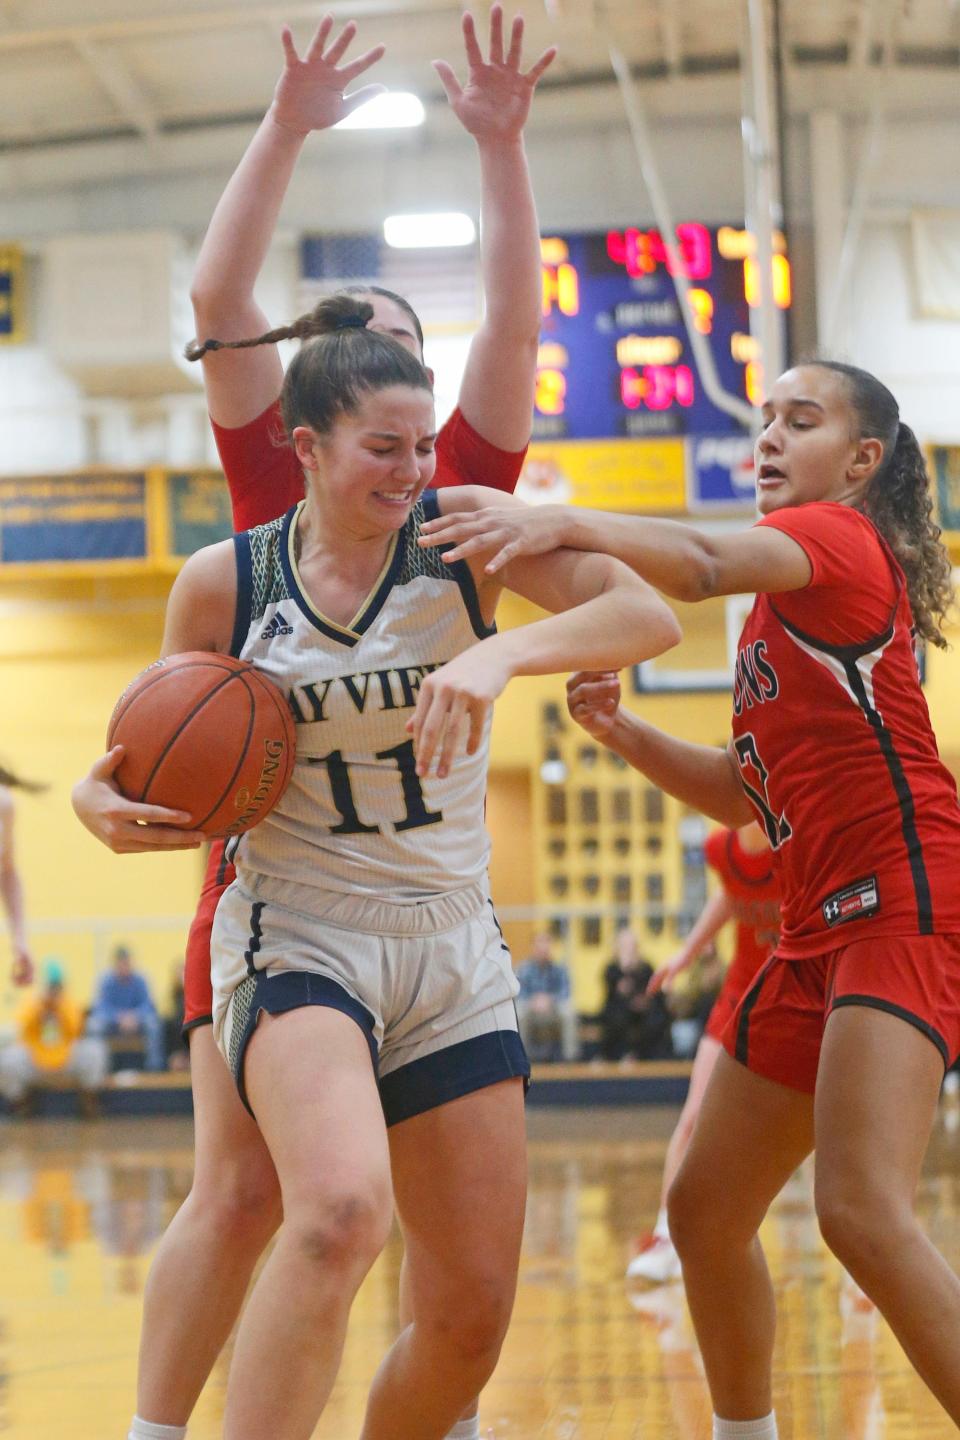 Bay View's Ava Wasylow battles for a rebound during the second quarter of Friday's win over Cranston West.